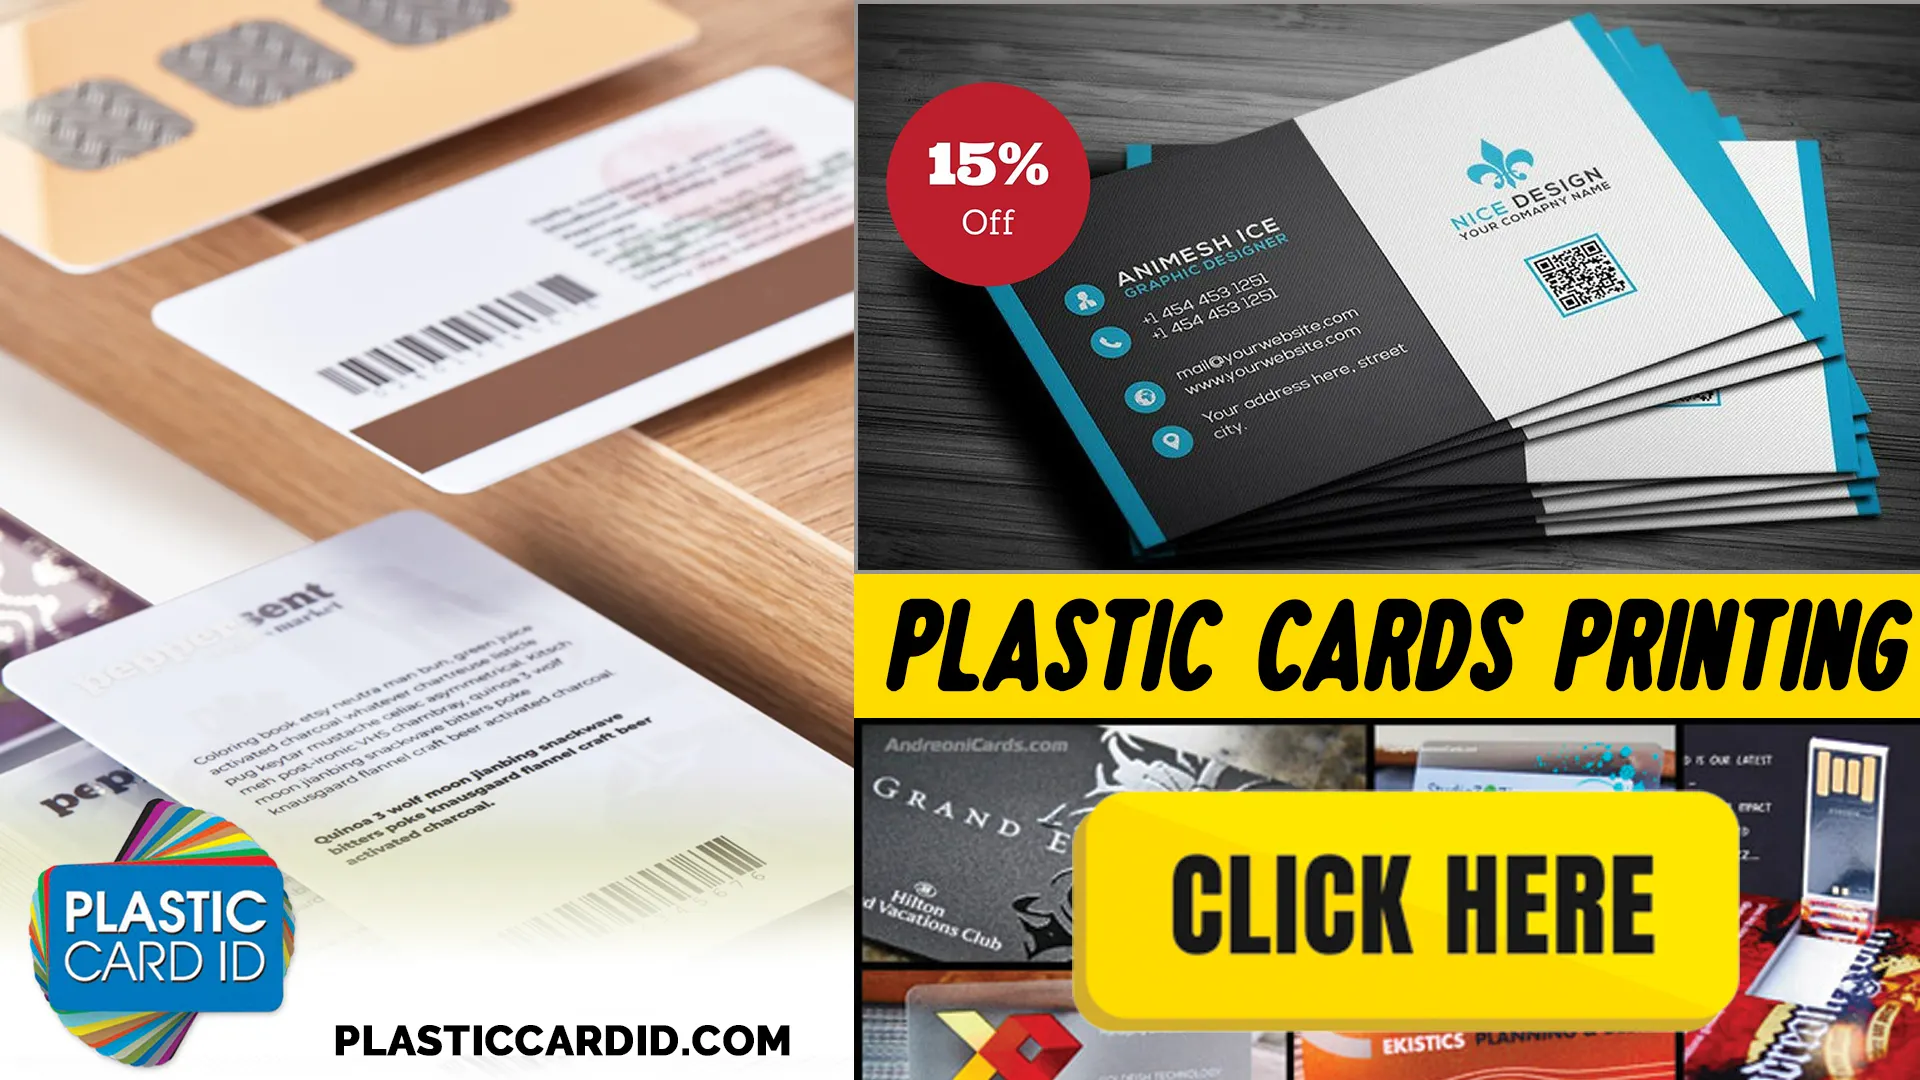 Benefits of Partnering with Plastic Card ID
